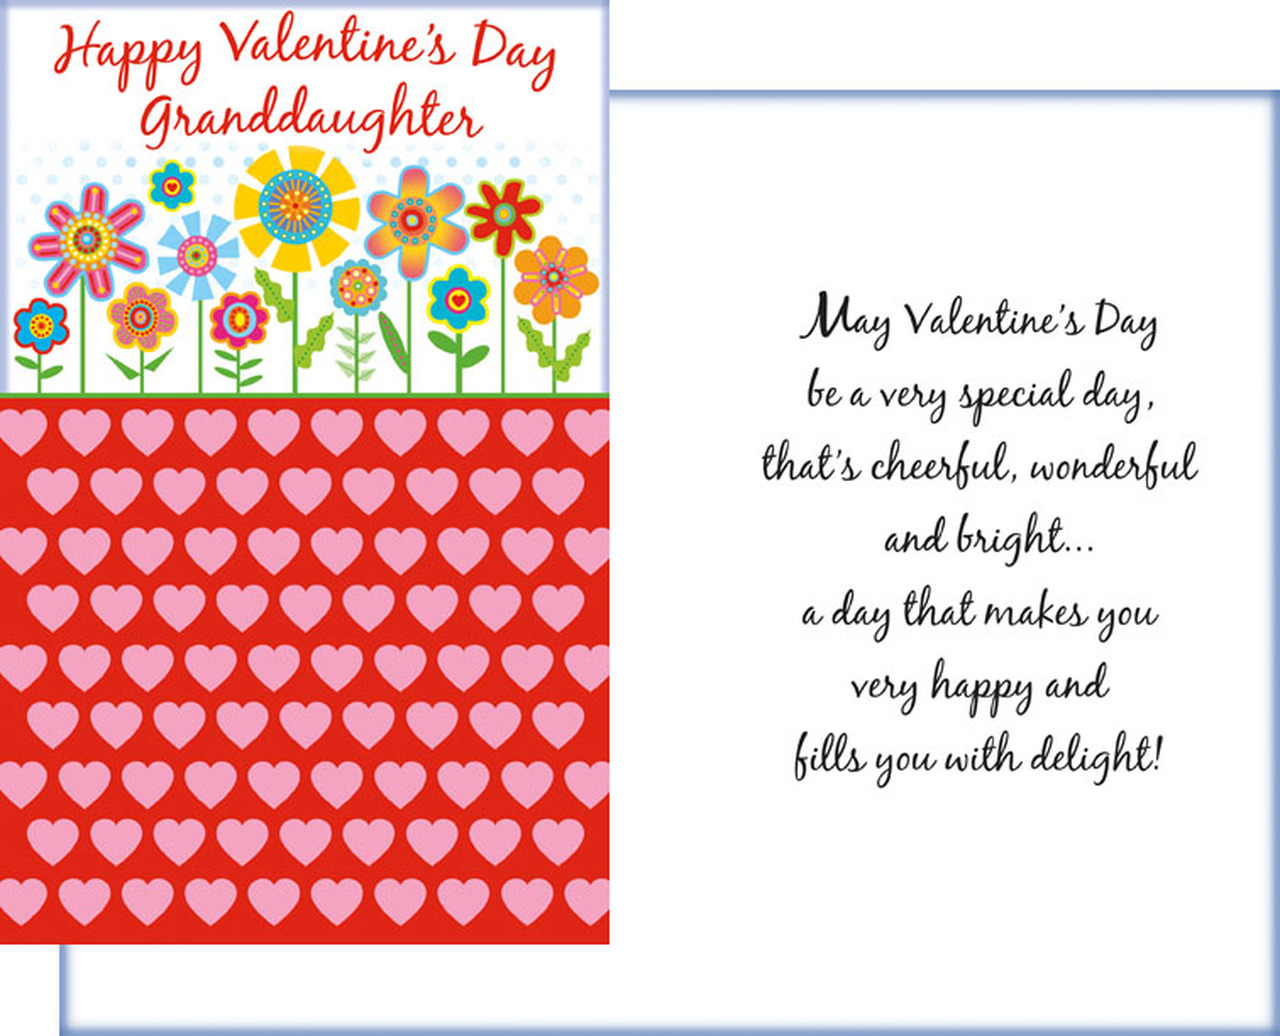 happy-valentine-s-day-granddaughter-card-that-s-cheerful-wonderful-and